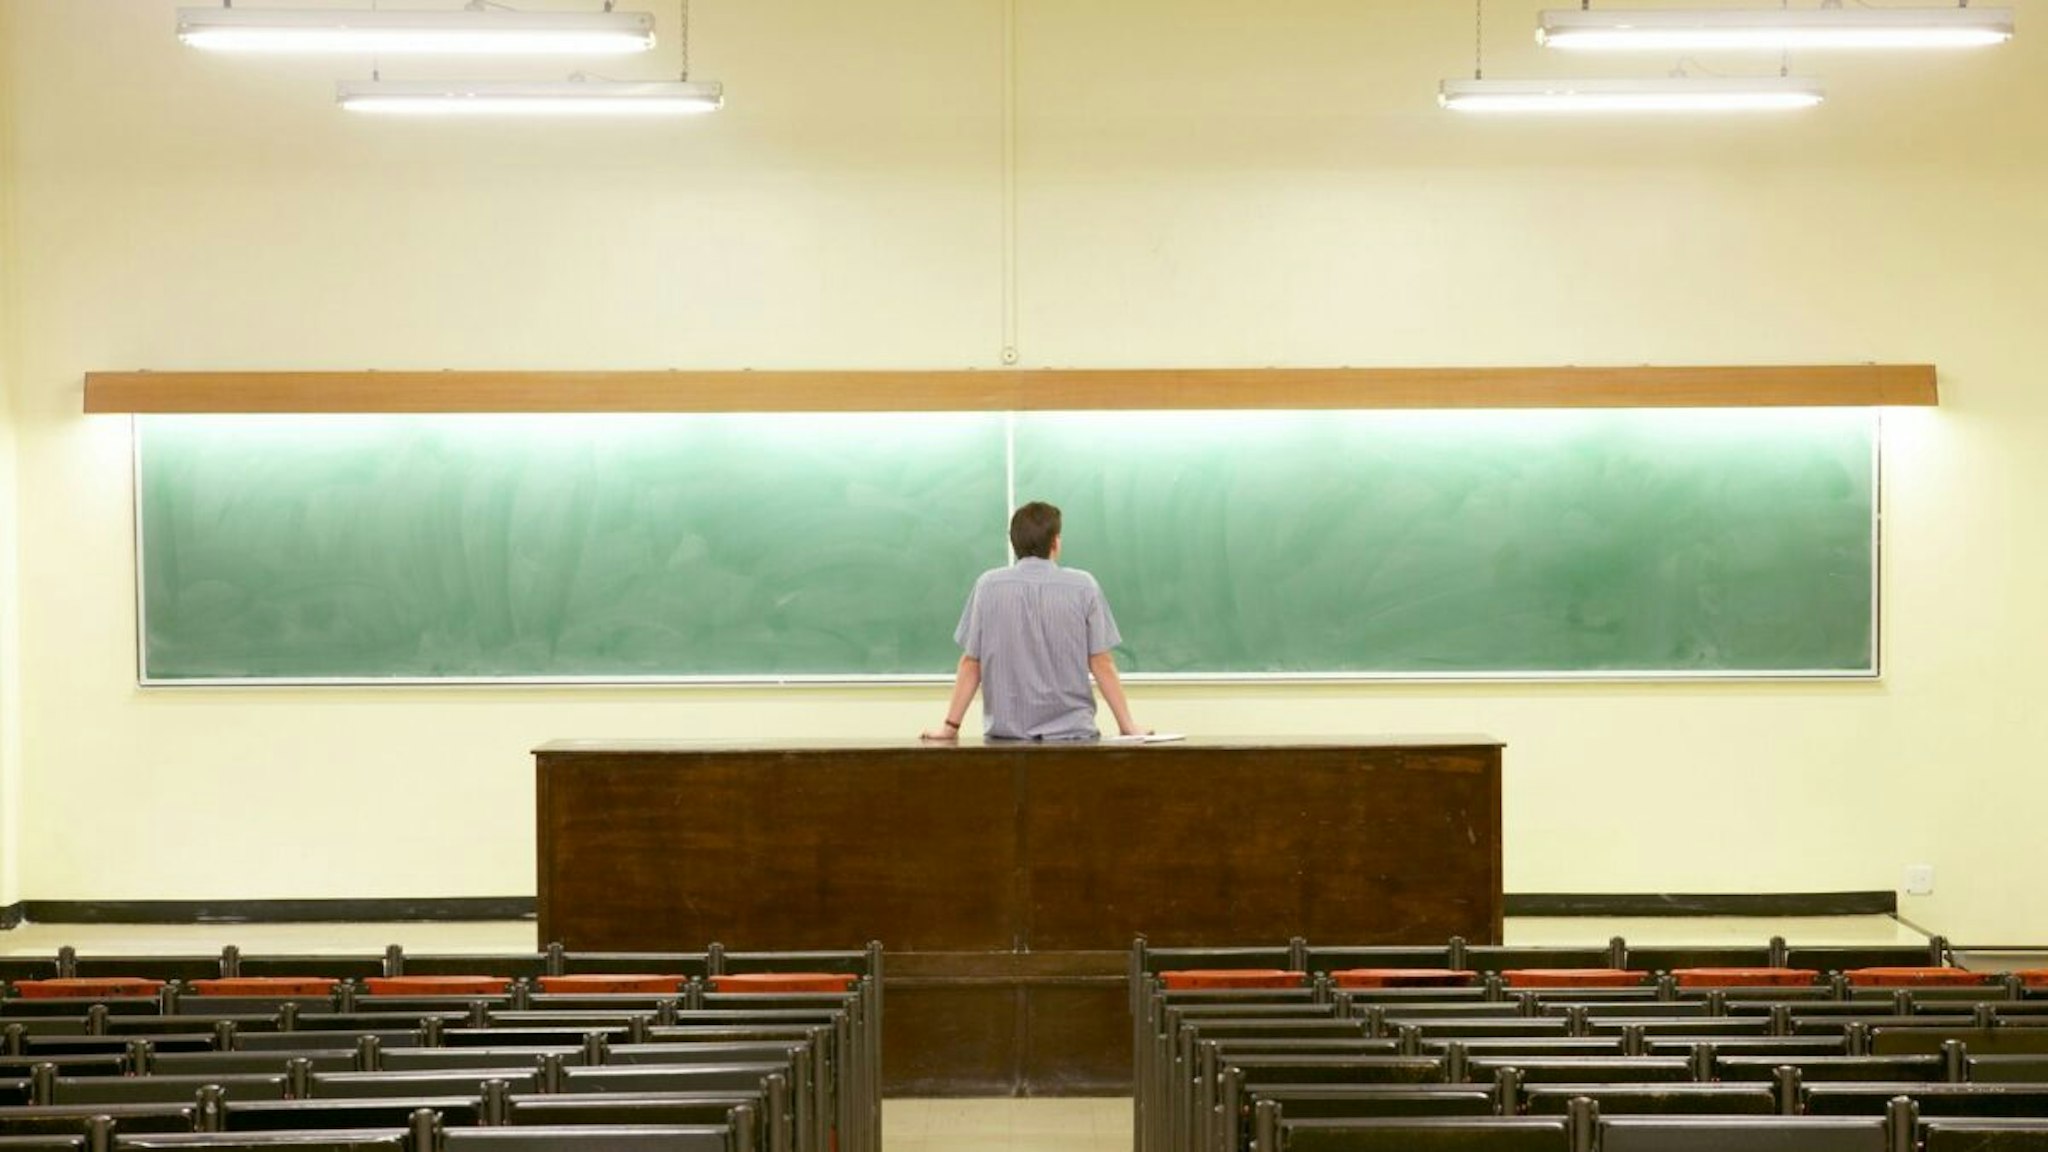 Man Staring at Blackboard in Empty Lecture Hall